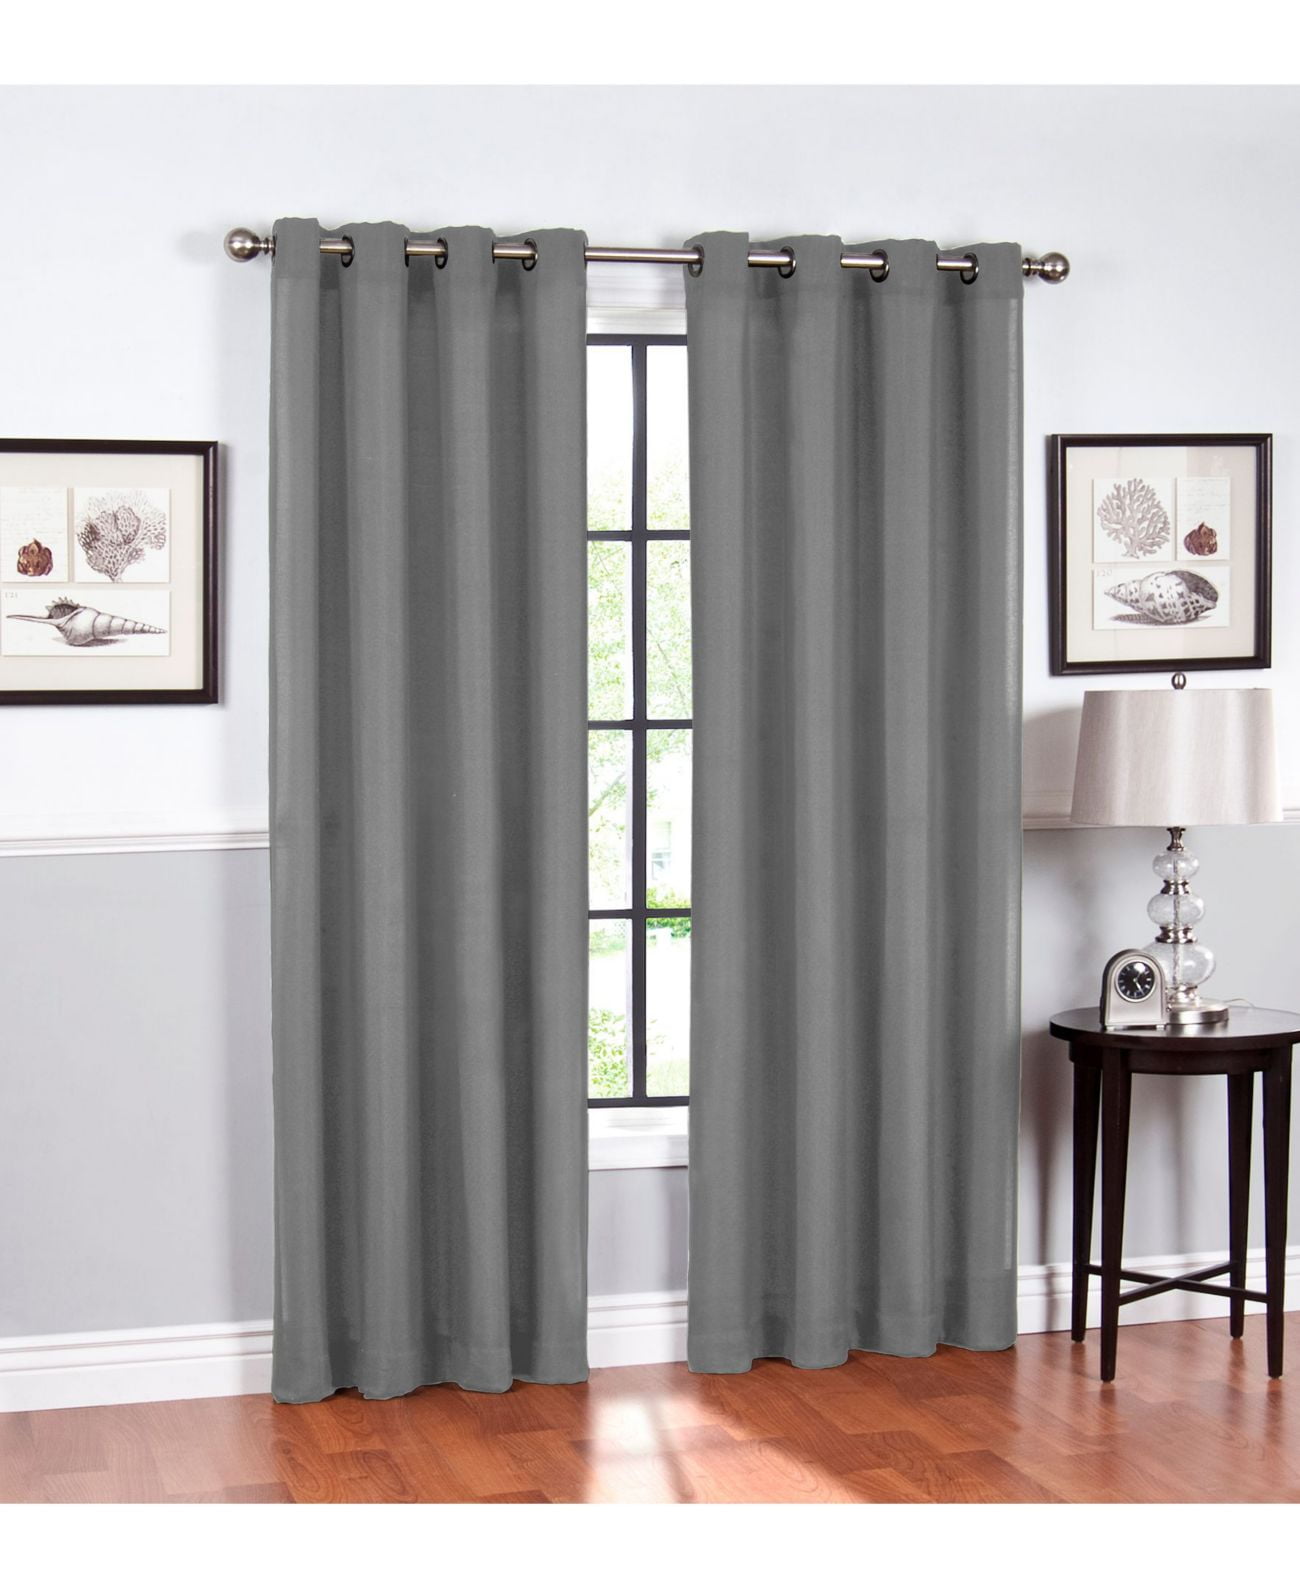 SunBlk Everly Total Blackout Window Curtain Panel 2-Pack Everly Charcoal 